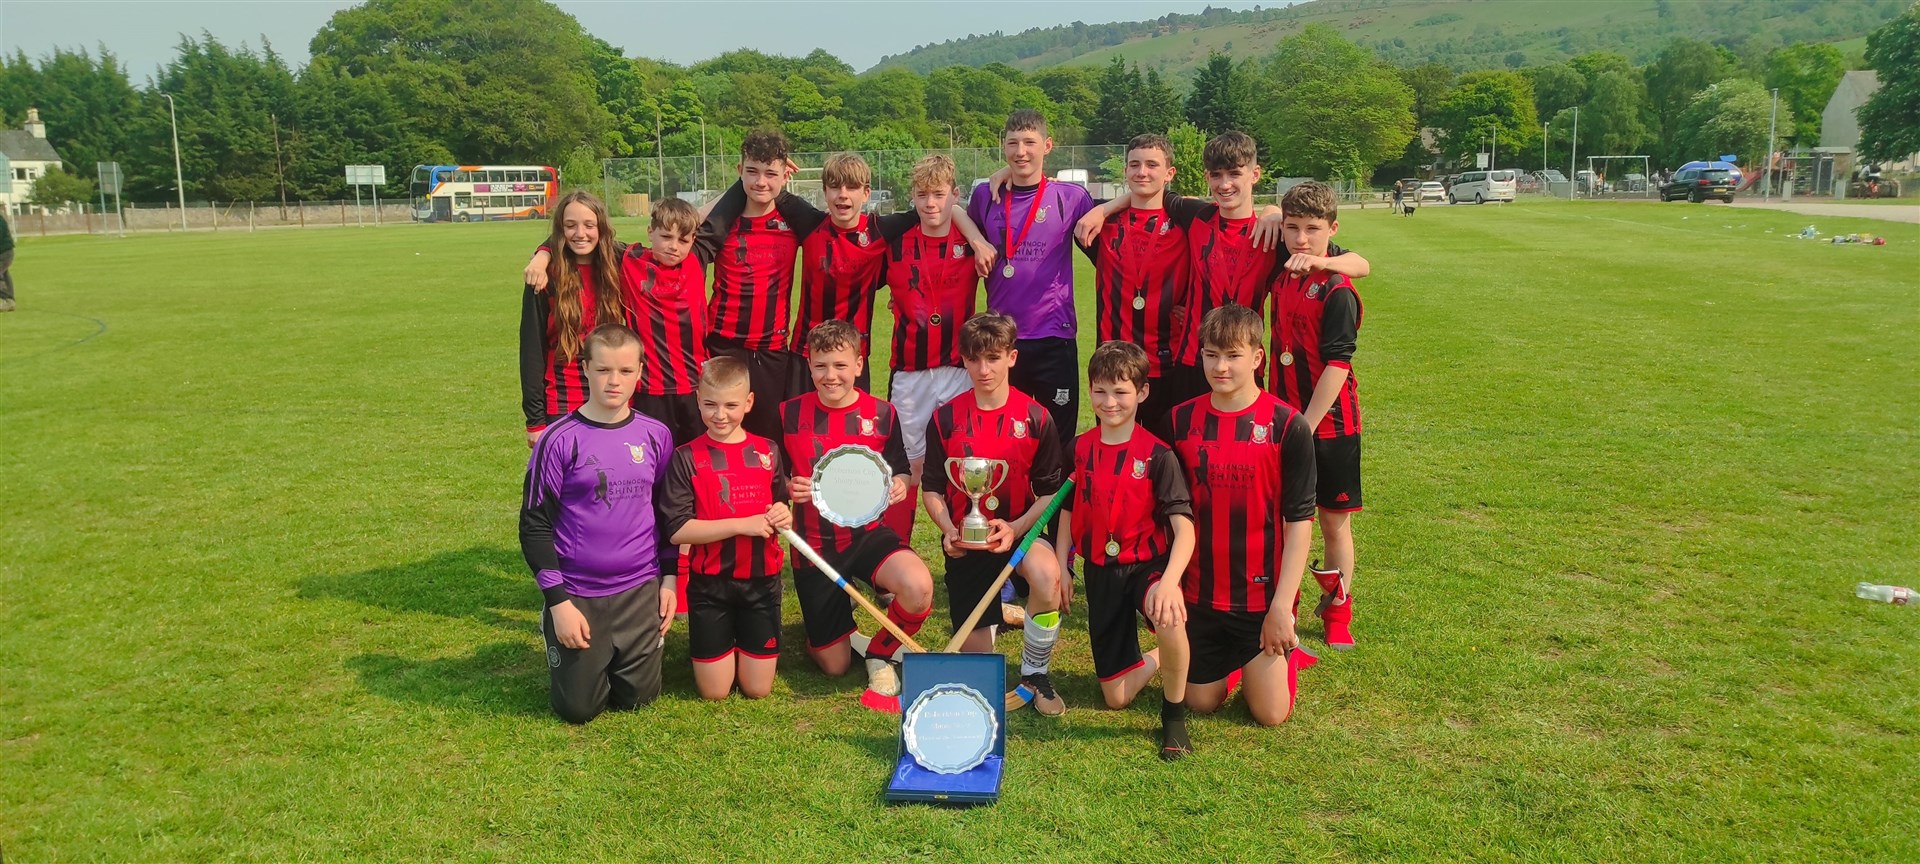 Members of the Kingussie High School A team who won the Robertson Cup Shinty Sixes.